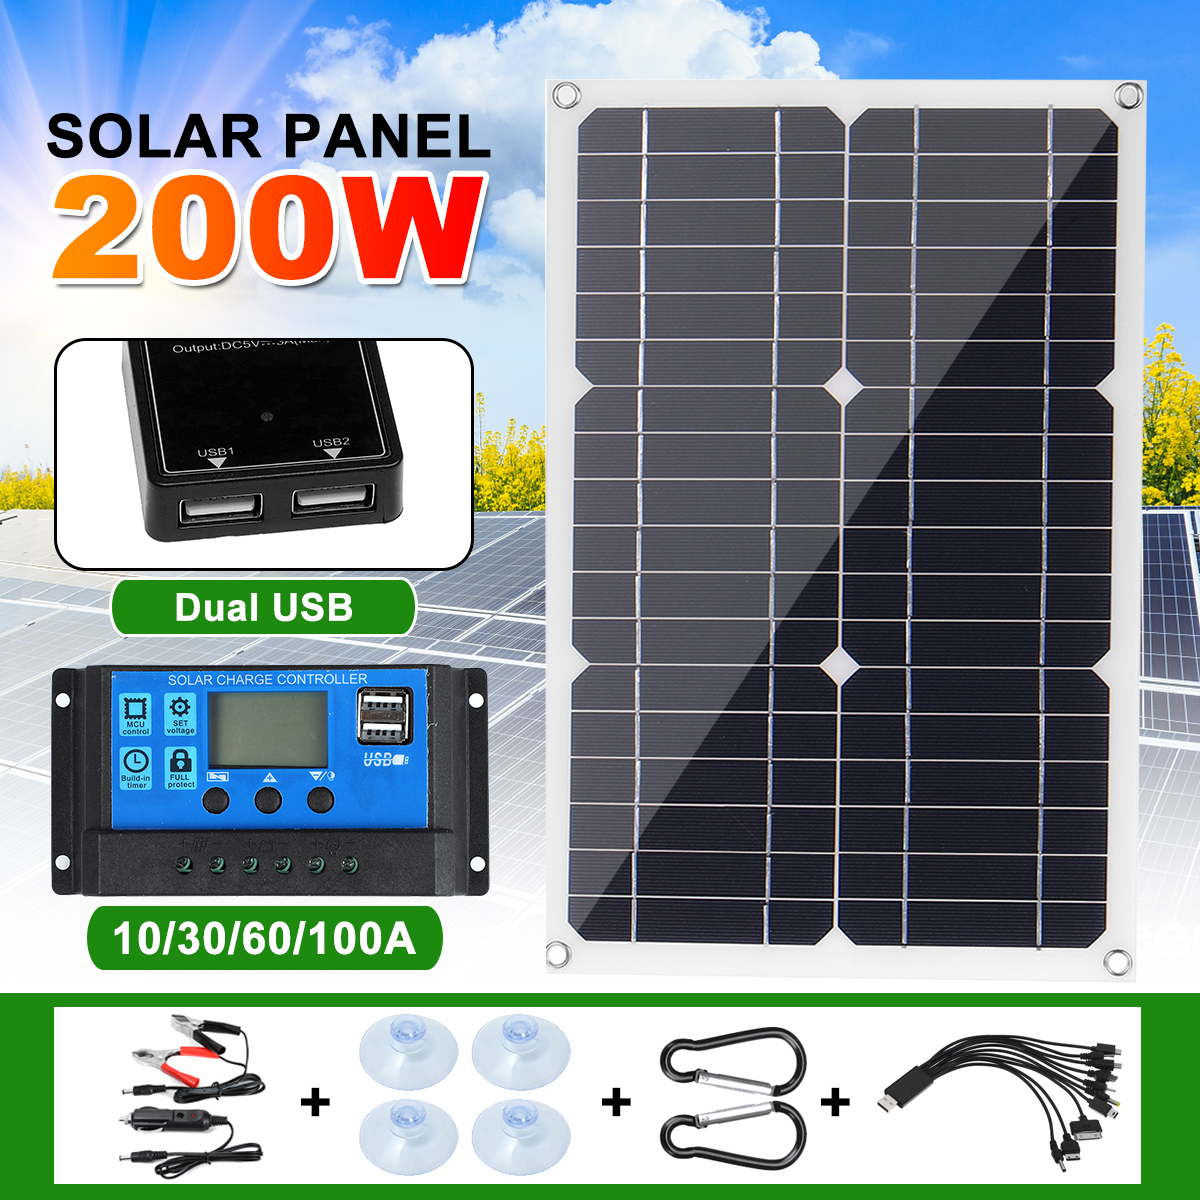 200W-Portable-Solar-Panel-Kit-Dual-DC-USB-Charger-Kit-W-None10A30A60A100A-Solar-Controller-Monocryst-1851663-2